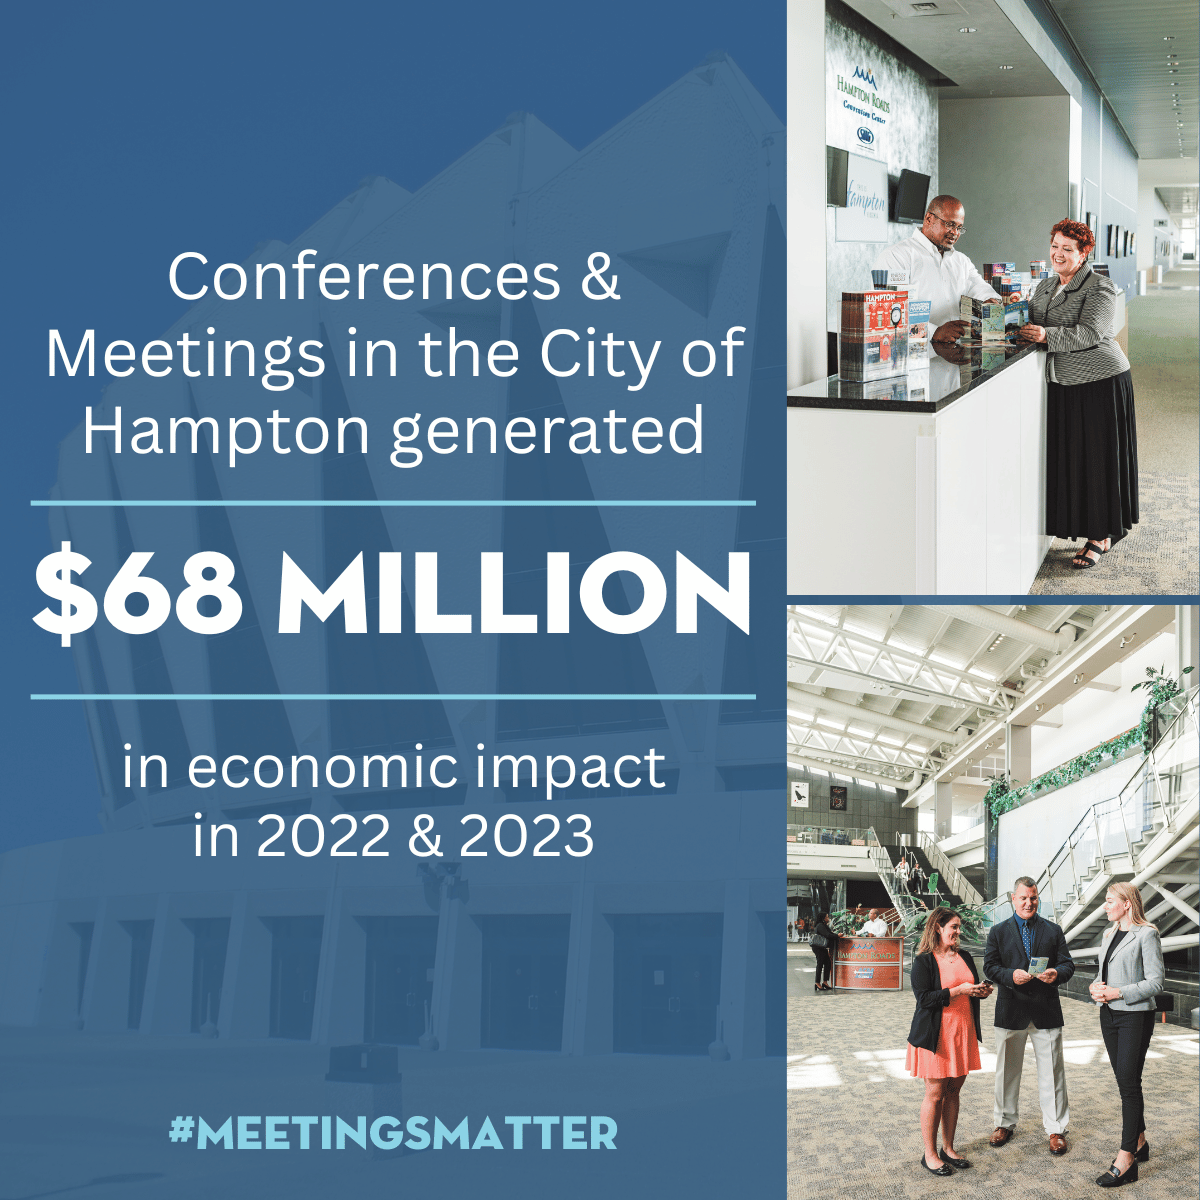 Meetings, events, & conventions held in Hampton create job growth and stimulate the city’s economy. This Global Meetings Industry Day we are celebrating all the economic benefits to our Hampton community generated by meetings & event planners! #MeetingsMatter #GMID2024 #Meetings